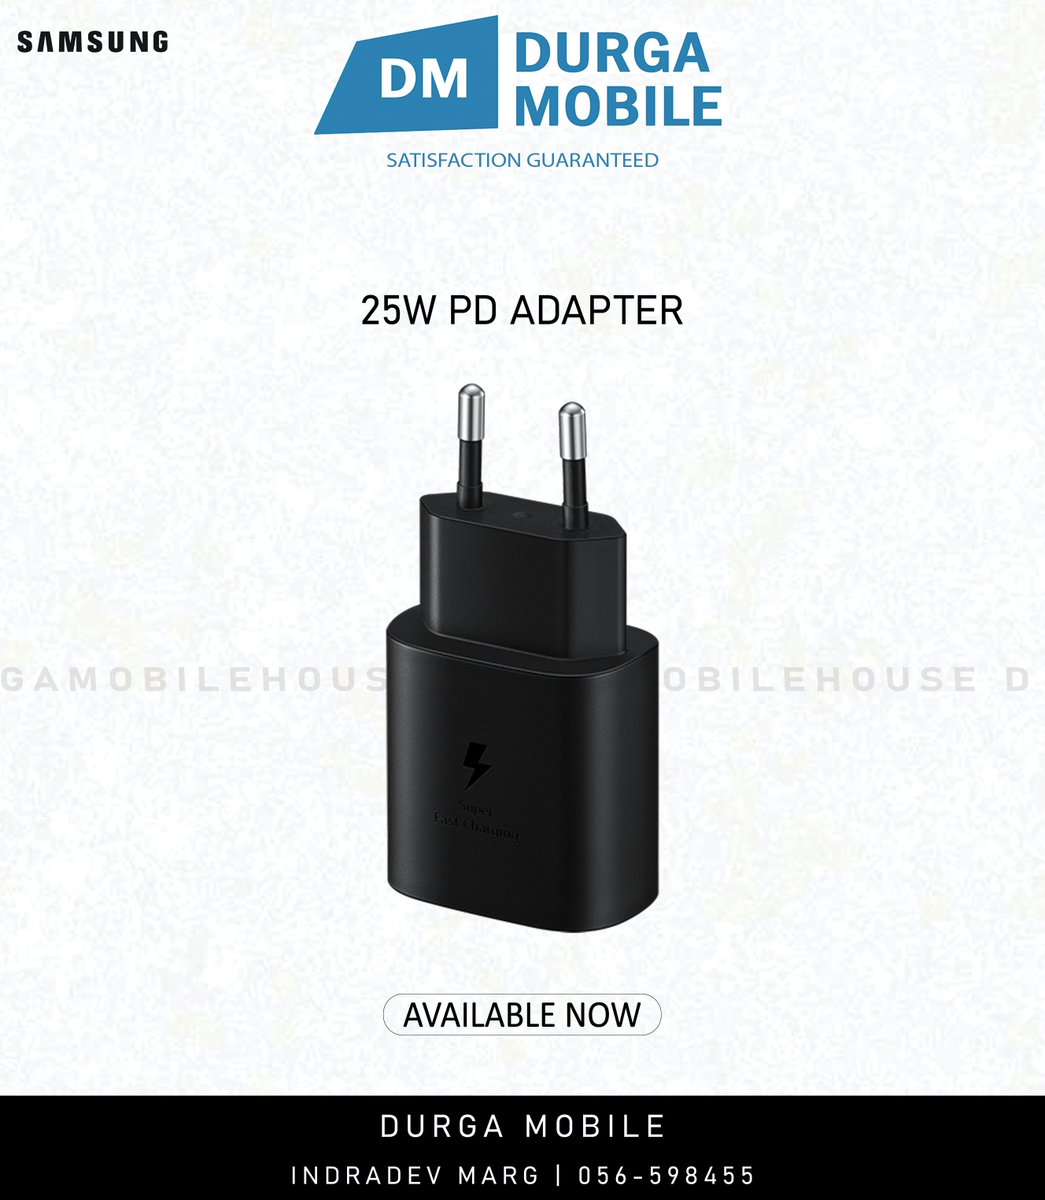 SAMSUNG 25W PD ADAPTER | AVAILABLE NOW
📍INDRADEV MARG
📞056-598455
🚚 DELIVERY ALL OVER NEPAL
💭 VISIT OUR SHOWROOM FOR MORE INFORMATION

SOCIAL MEDIA :

facebook.com/durgamobilehou…
instagram.com/durgamobilehou…
twitter.com/imdurgamobile
.
#durgamobilehouse #Samsung  #SamsungUnpacked